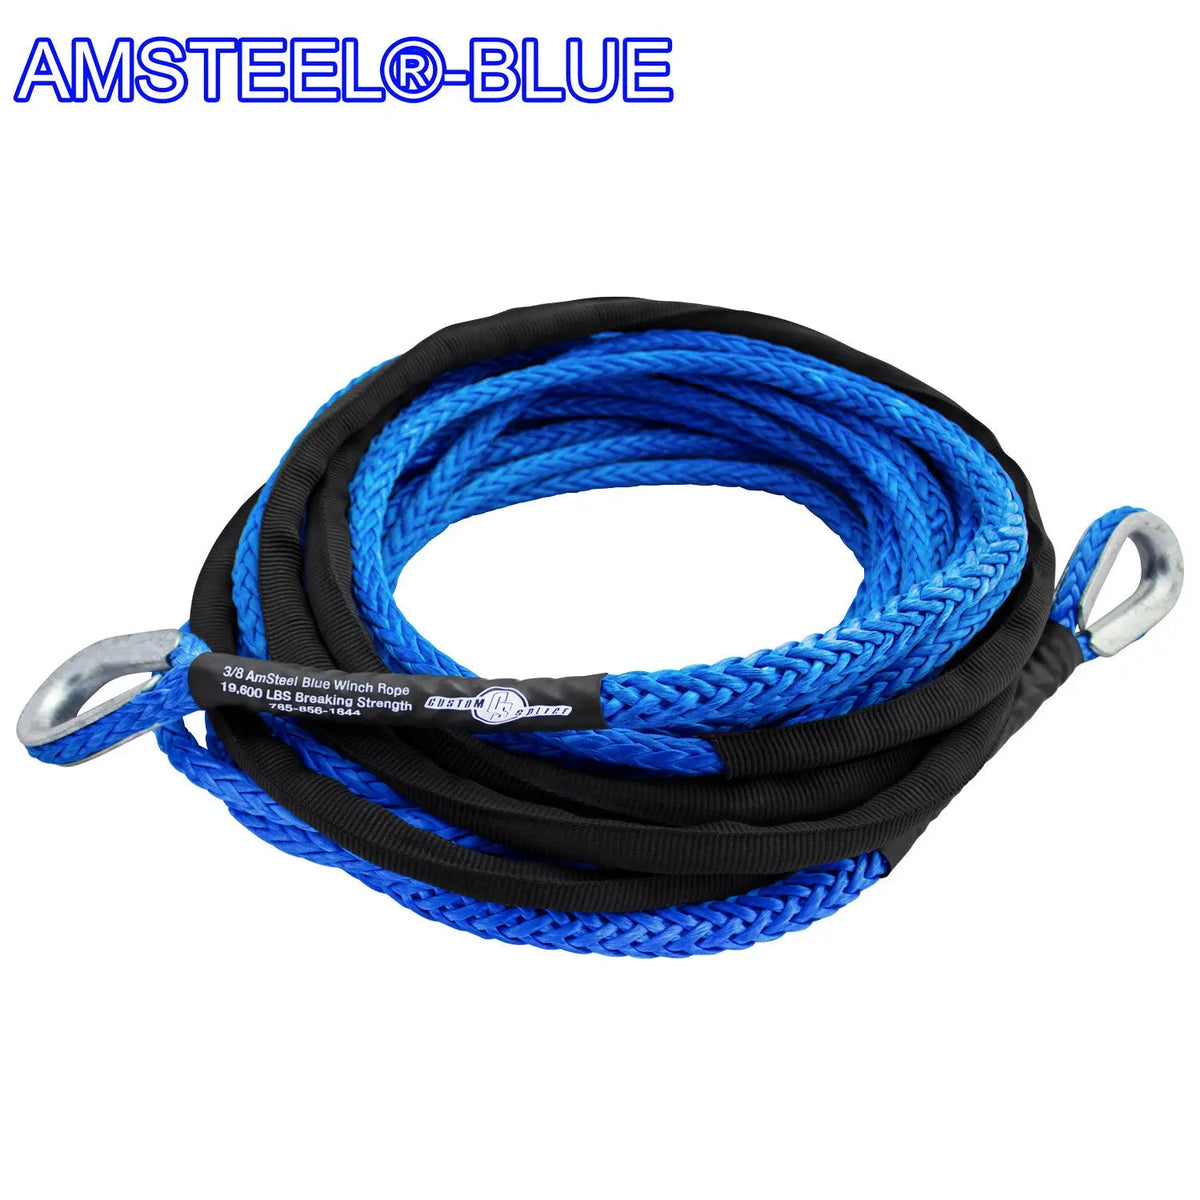 5/16 Extension - AmSteel Blue Winch Rope